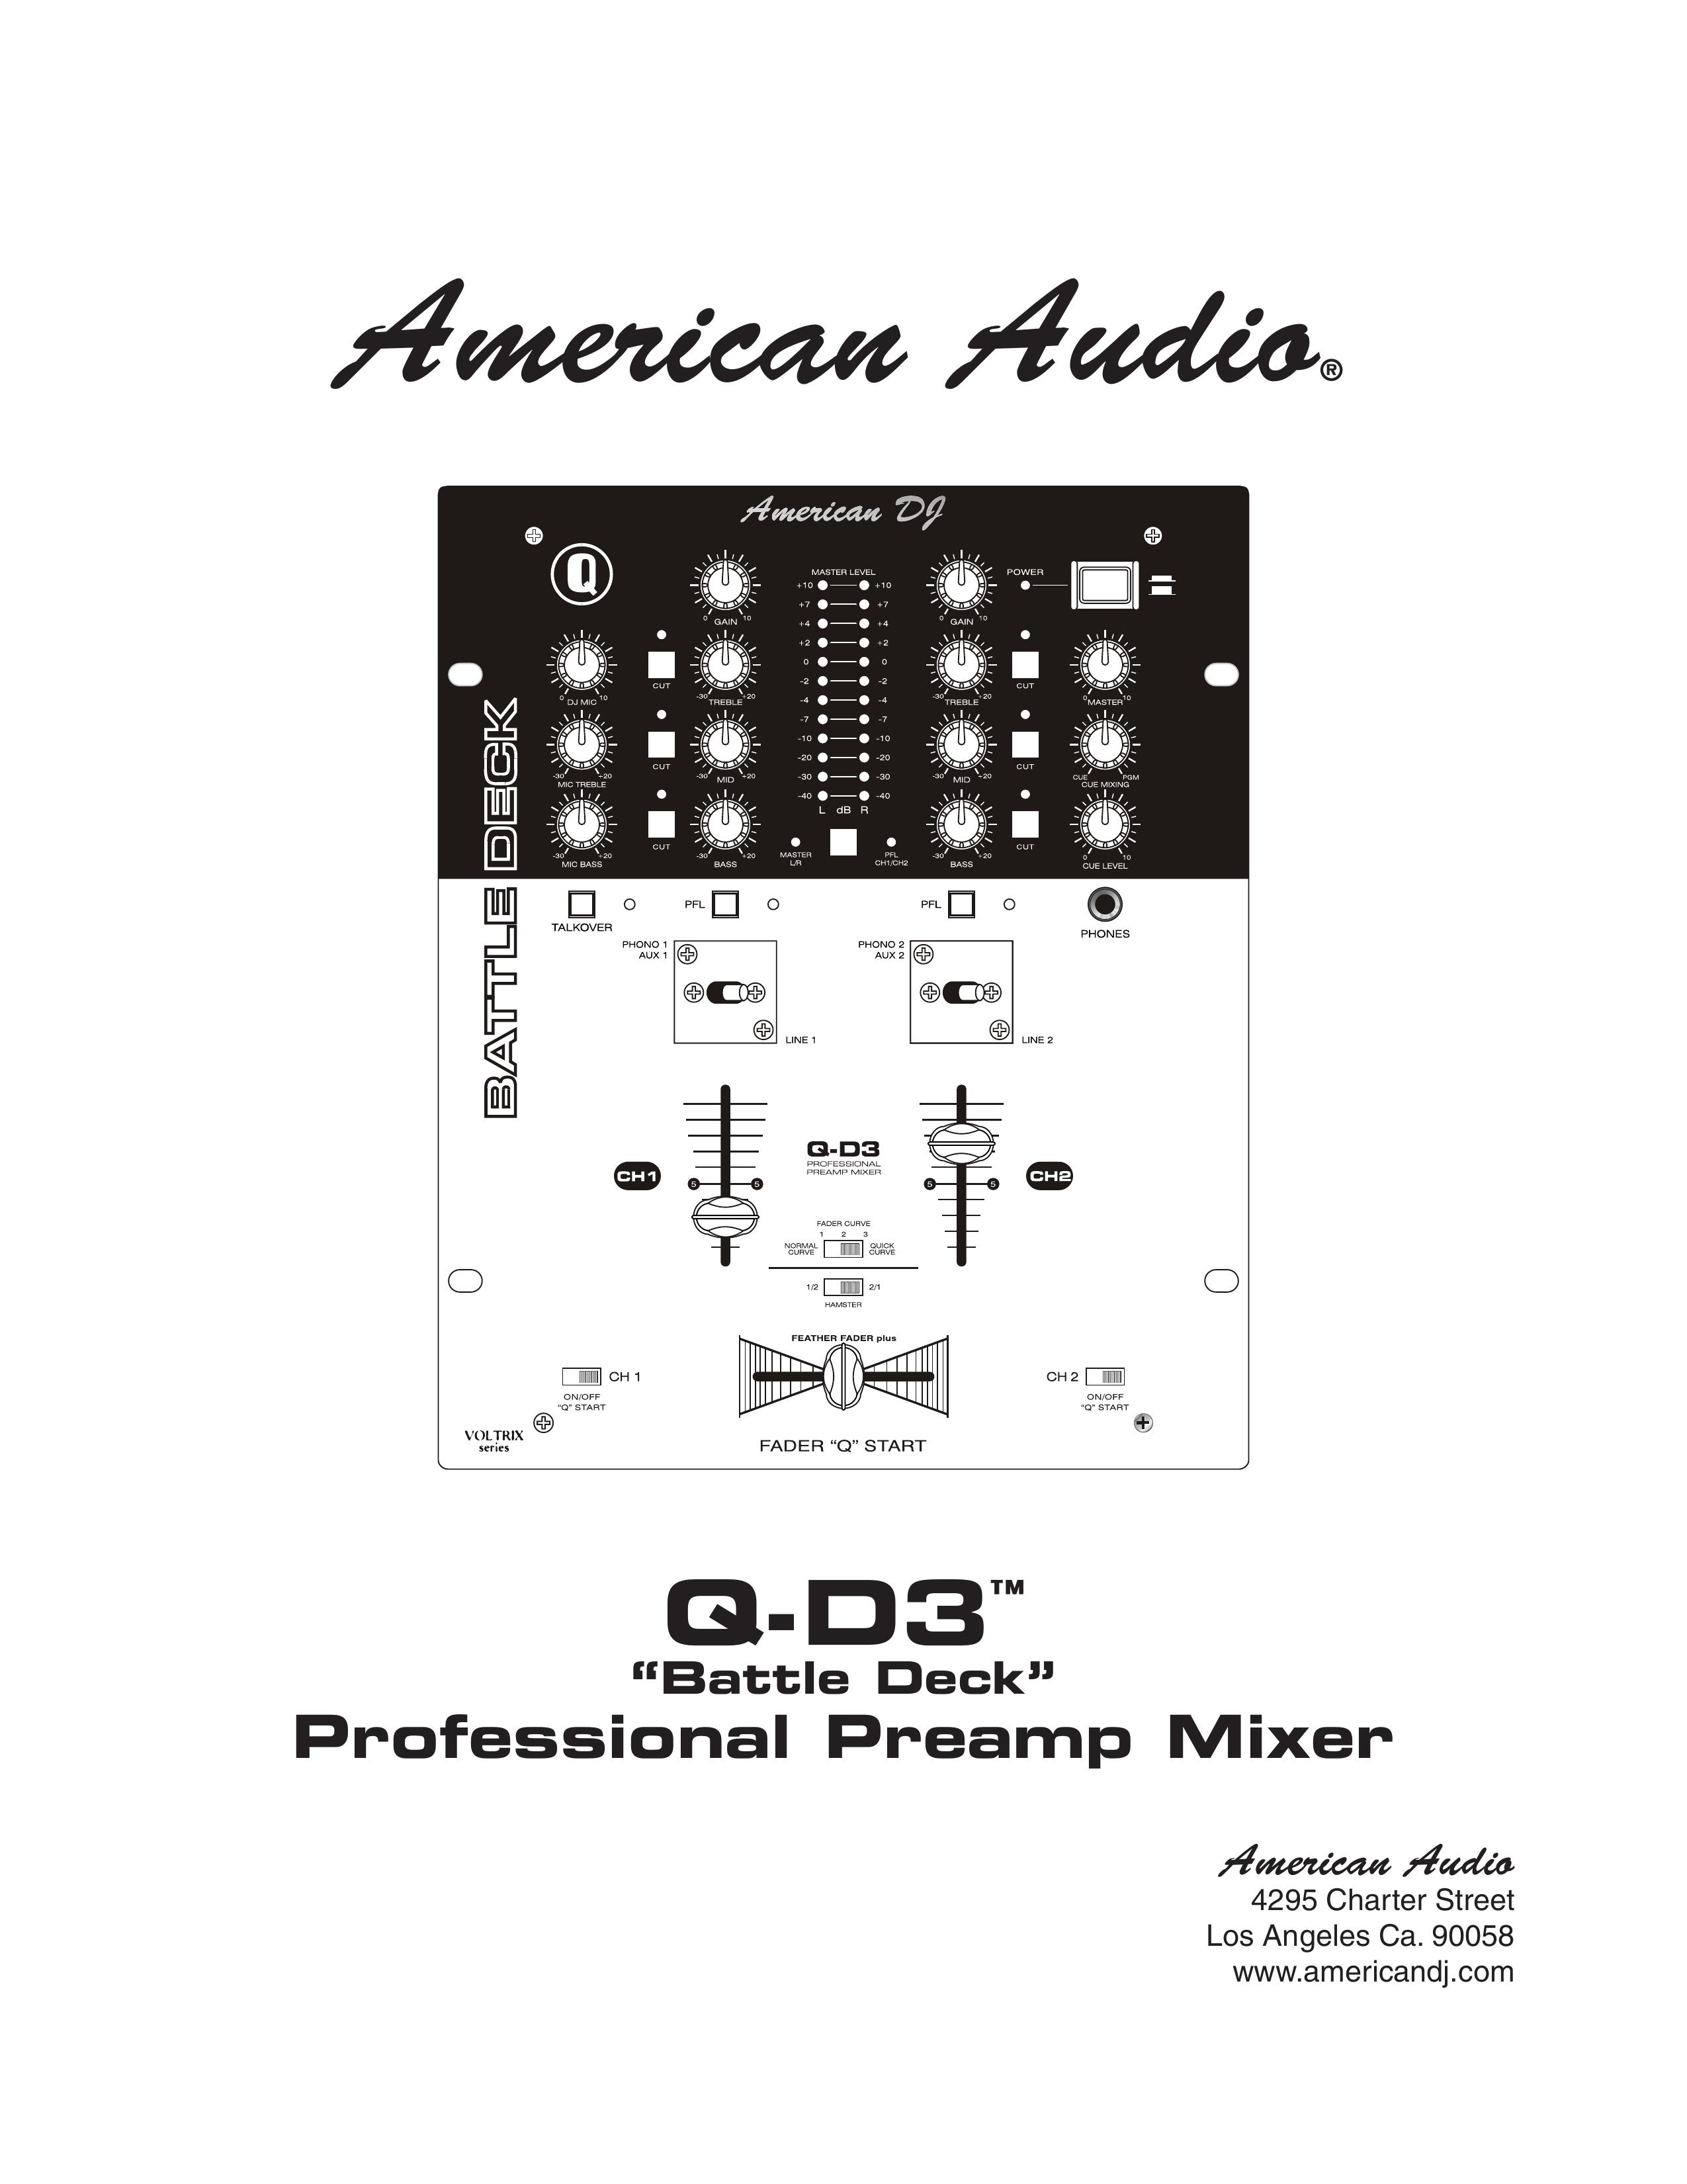 American Audio Q-D3 Music Mixer User Manual (Page 1)